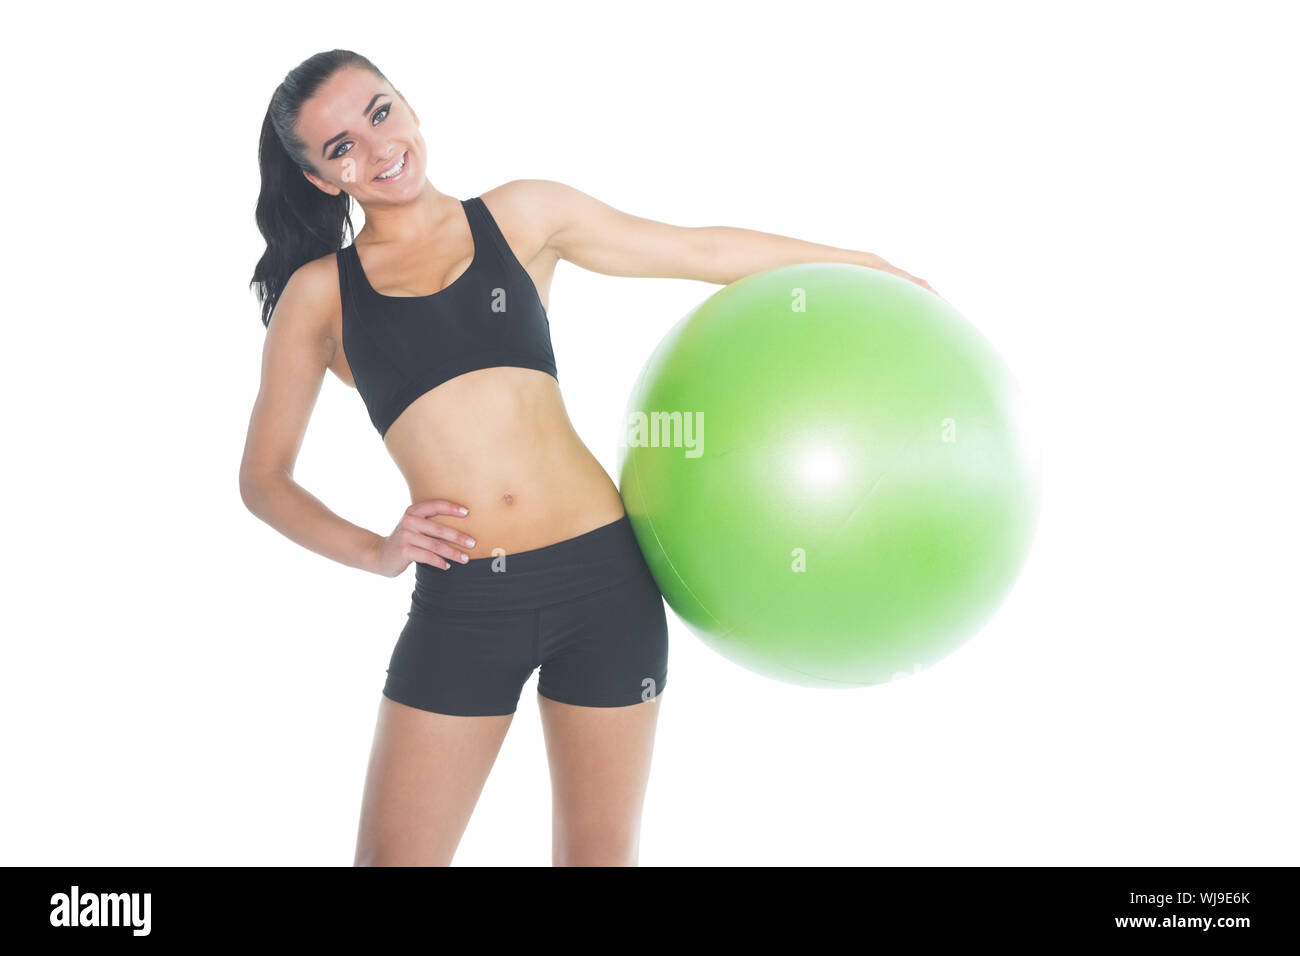 Attractive fit woman posing holding a green exercise ball smiling at camera Stock Photo